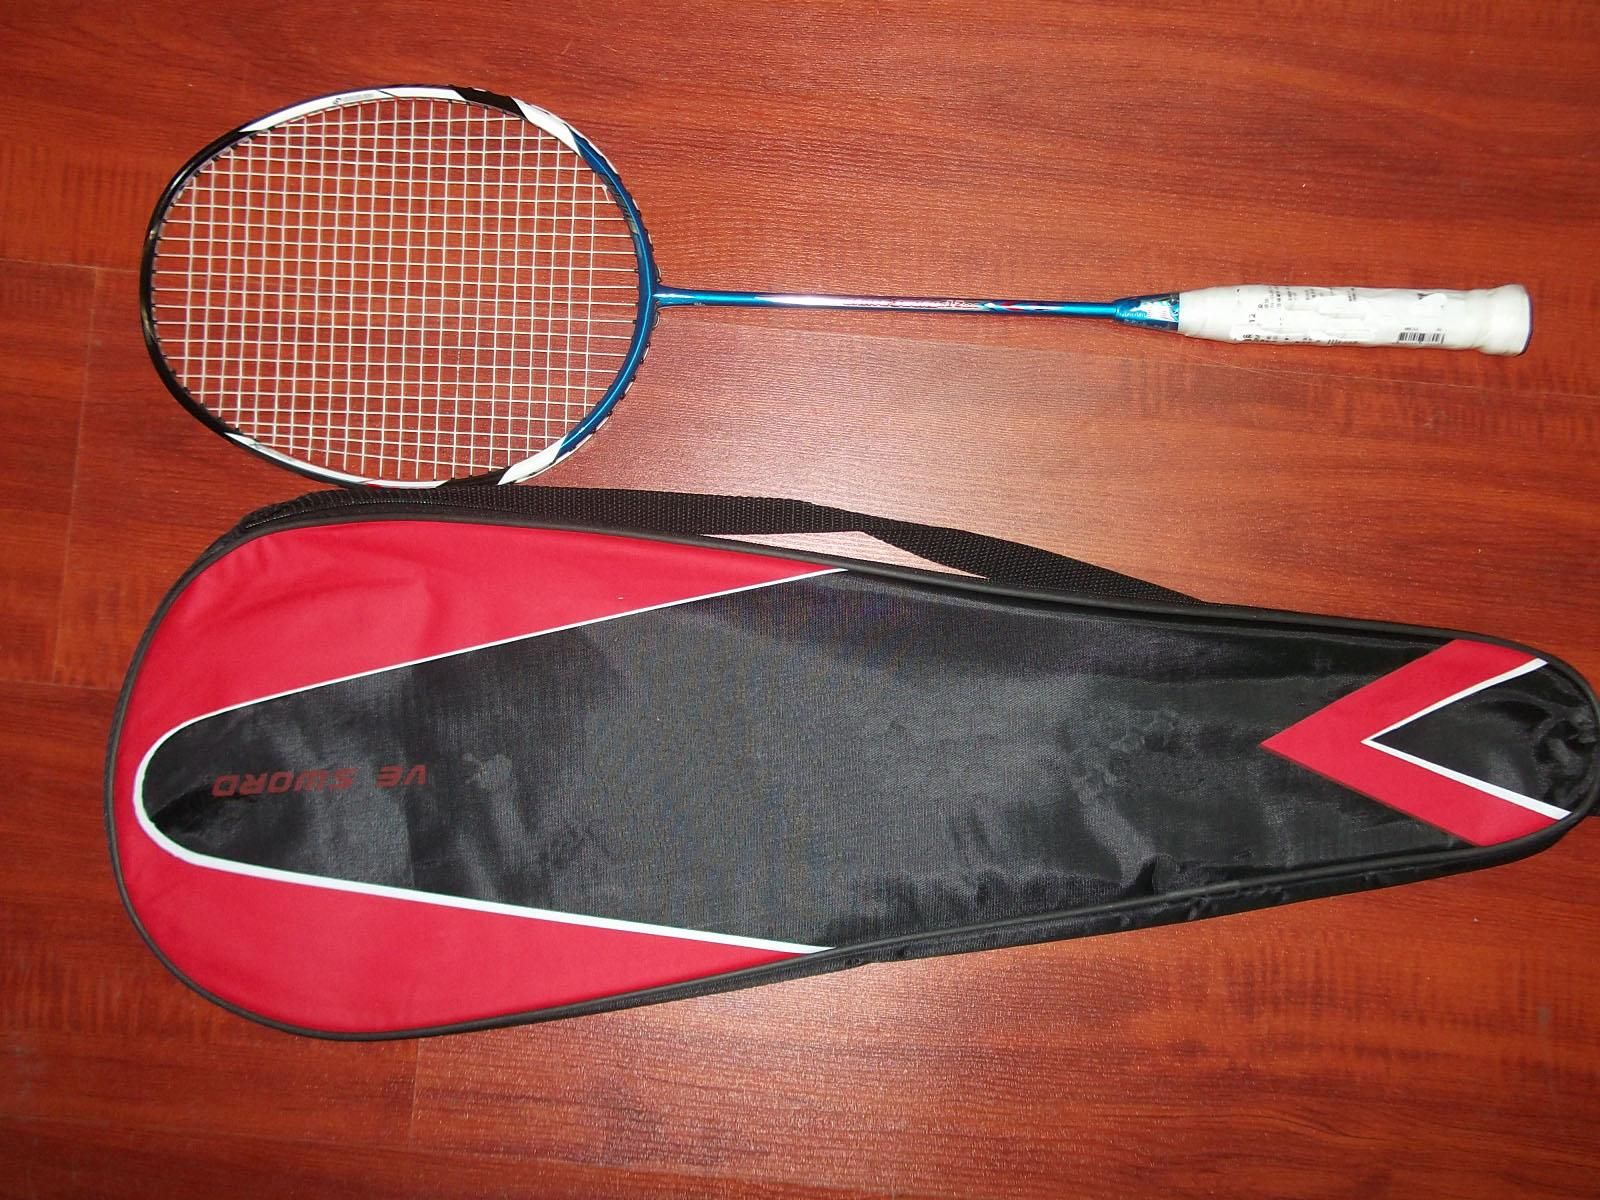 Wholesale Famous Brand Badminton Racket Brave Sword 12 From Yushui11, $165.62 DHgate